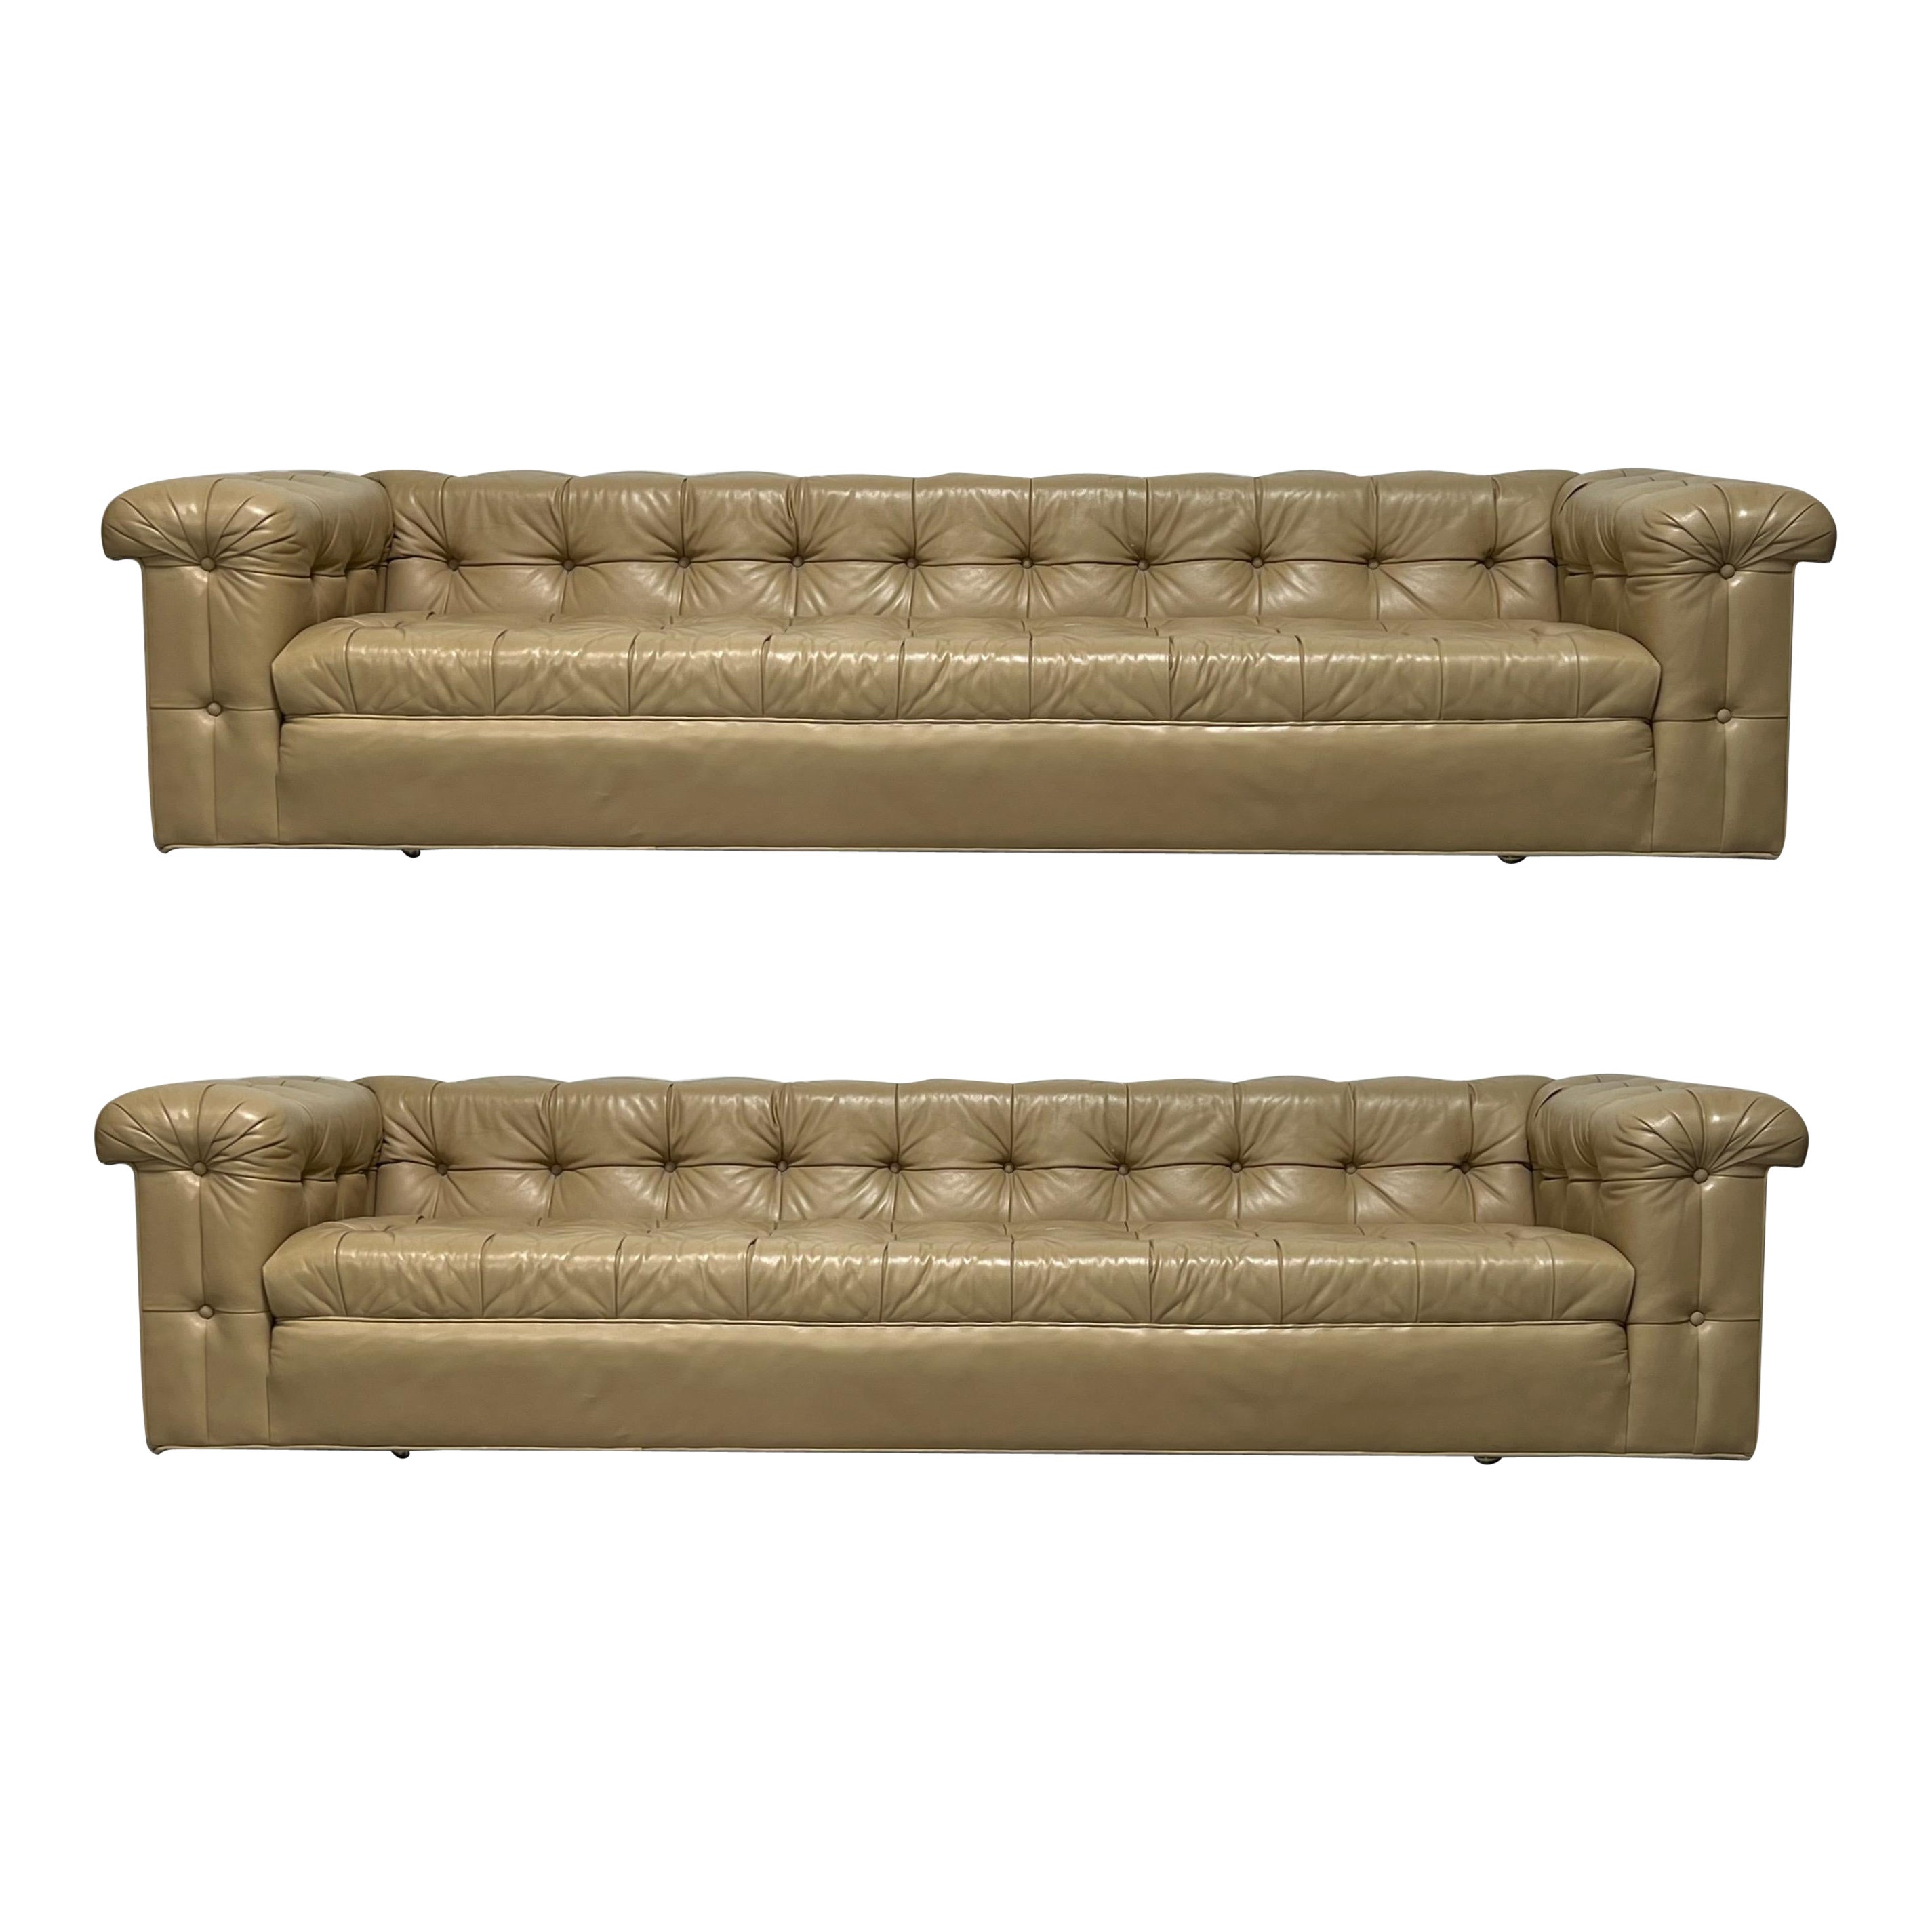 Pair of Party Sofas by Edward Wormley for Dunbar in Original Leather